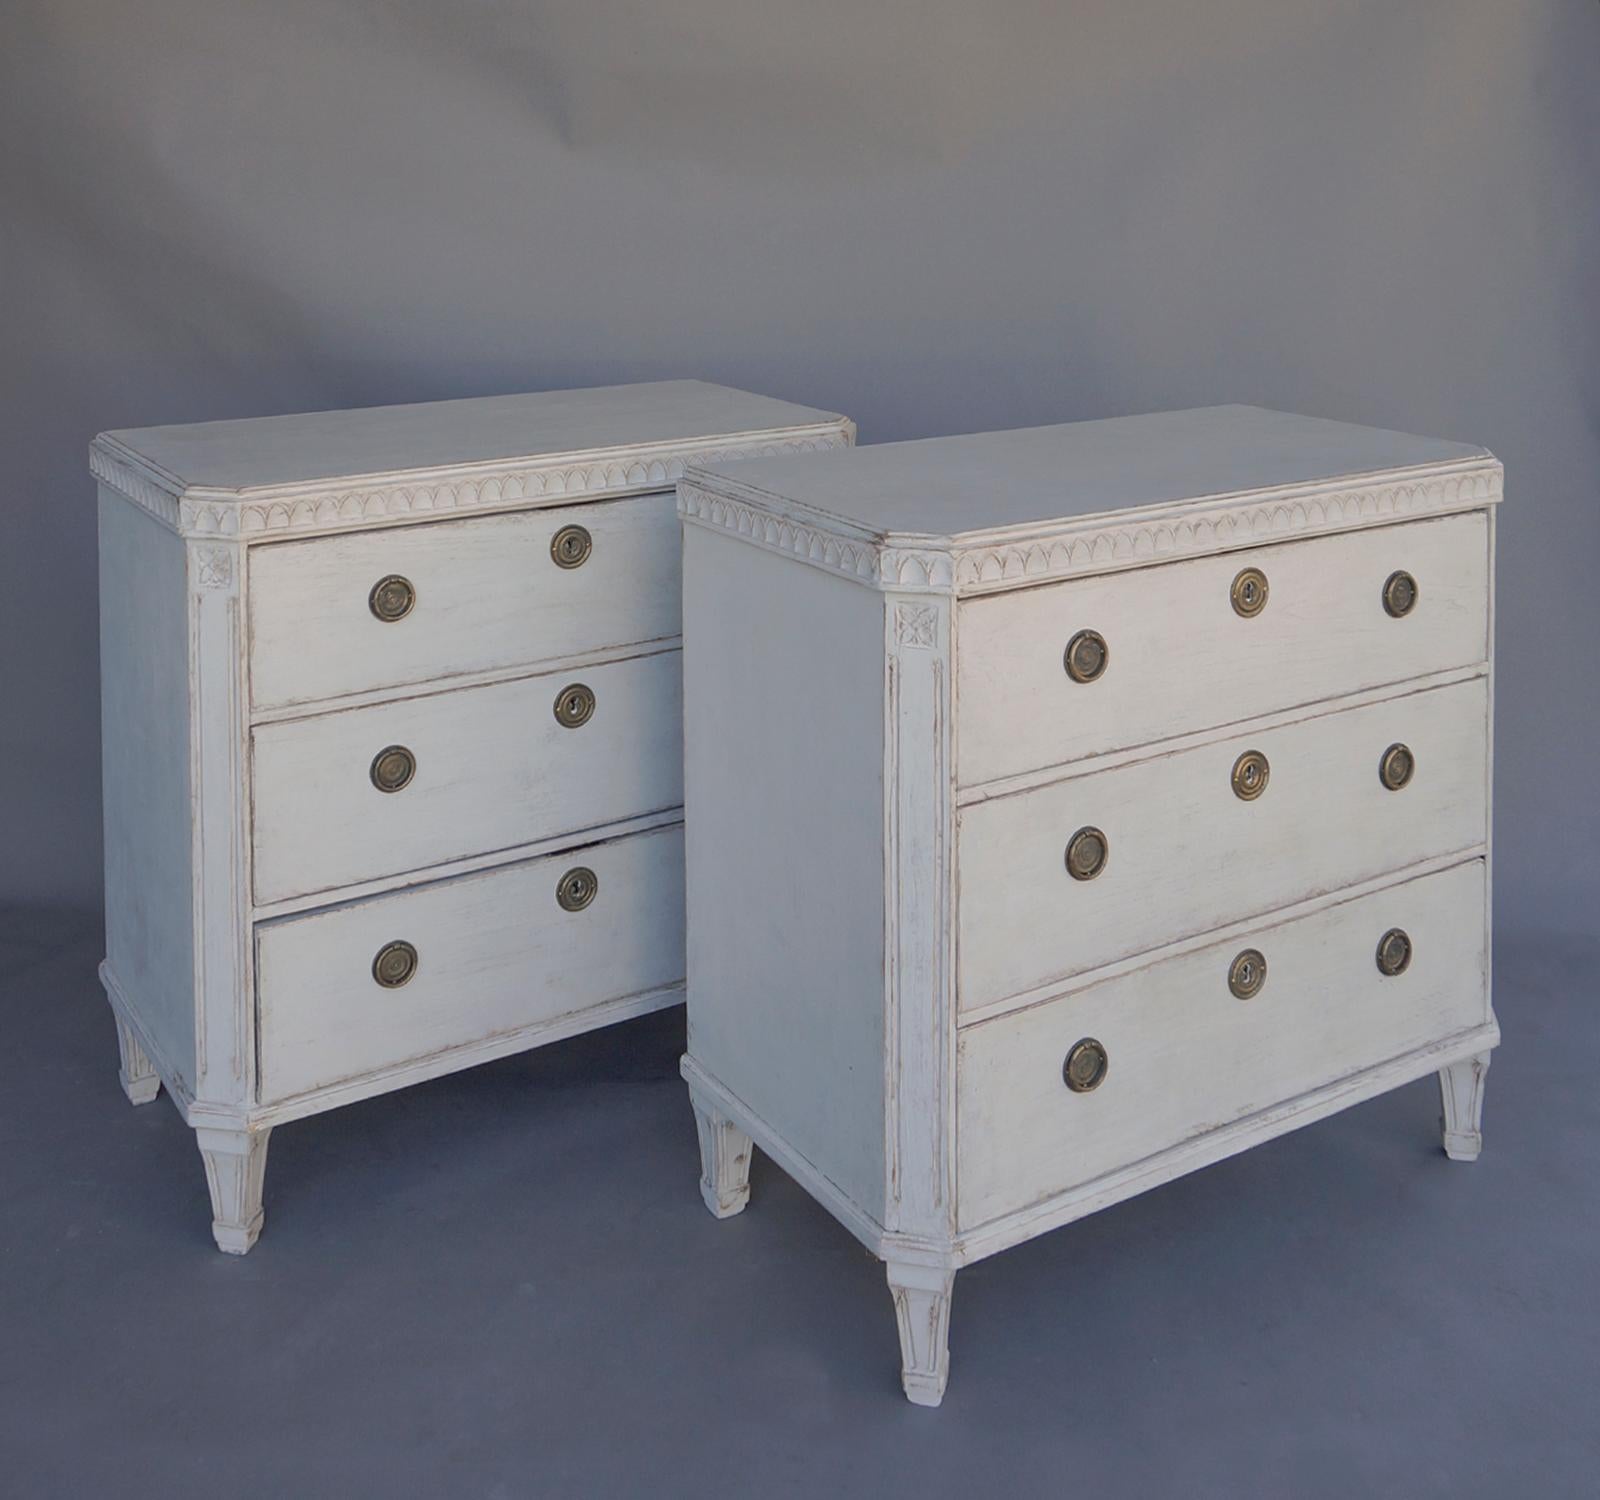 Pair of commodes, Sweden circa 1880, in the Gustavian Style. Shaped top with lamb’s tongue molding and canted corners with incised rosettes at the top. Brass hardware on the three drawers, later paint, and a repair to the back of one commode.